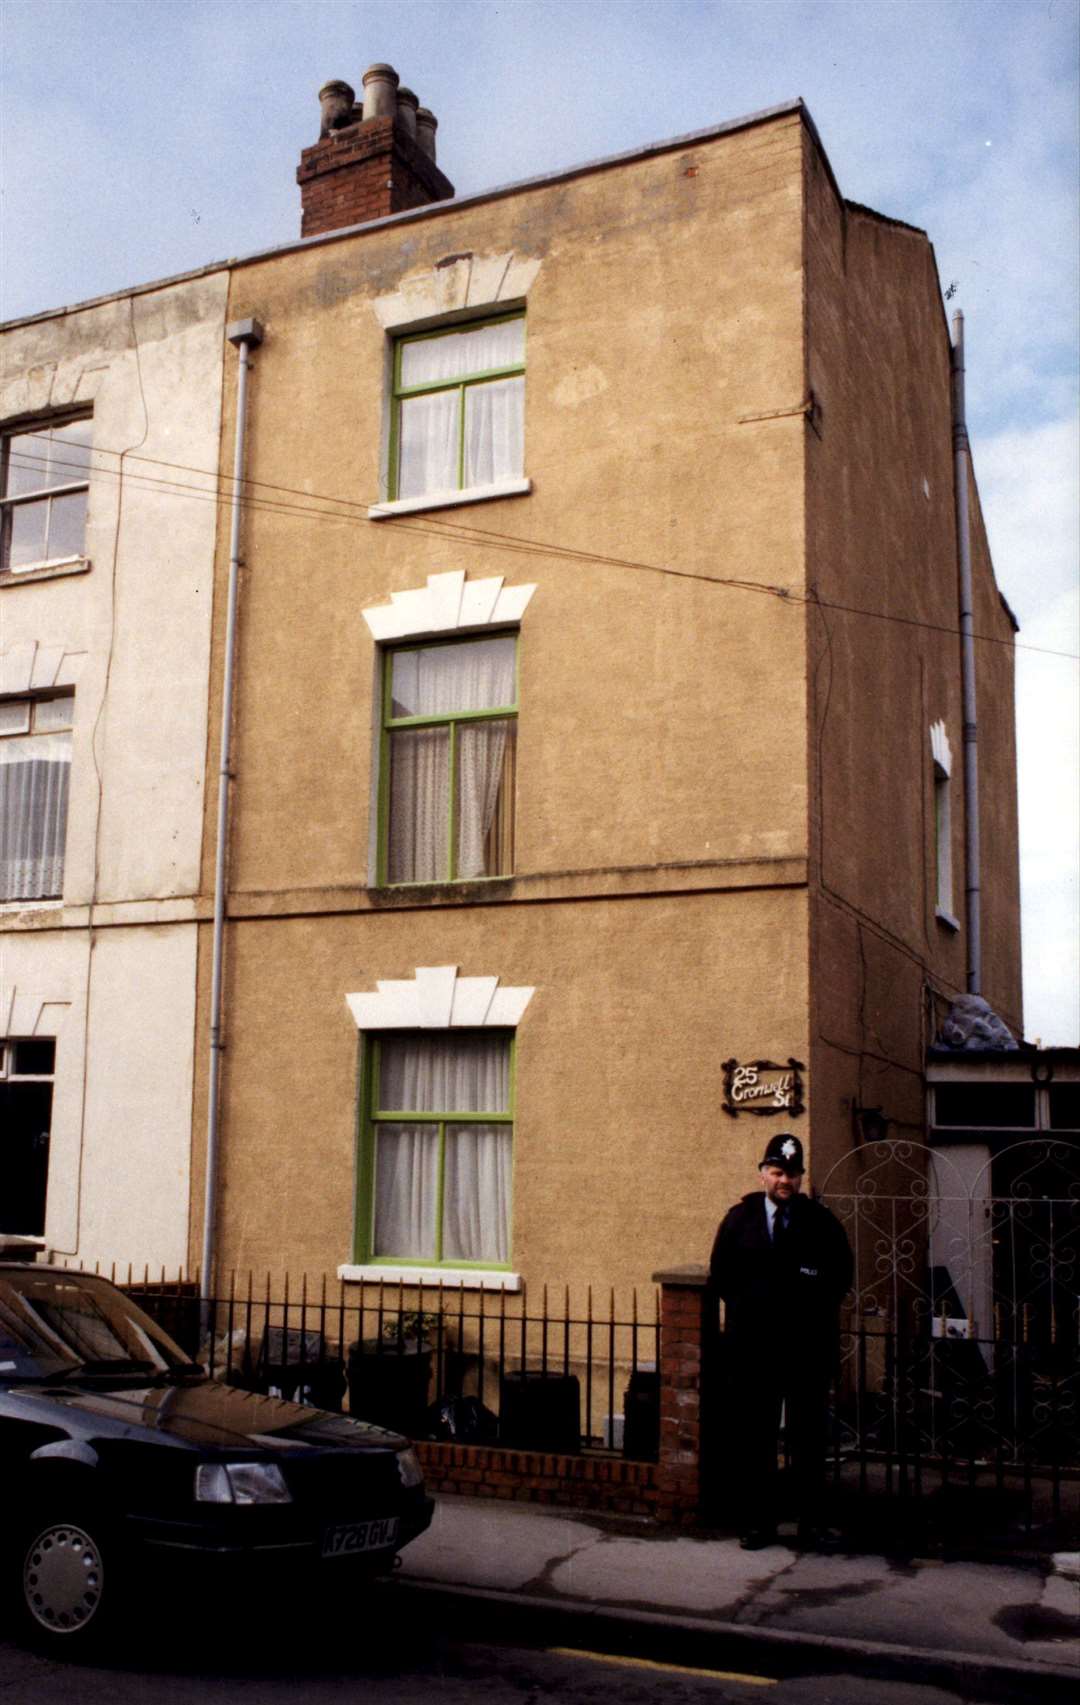 25 Cromwell Street in Gloucester was the home of Fred and Rose West. Picture: SWNS